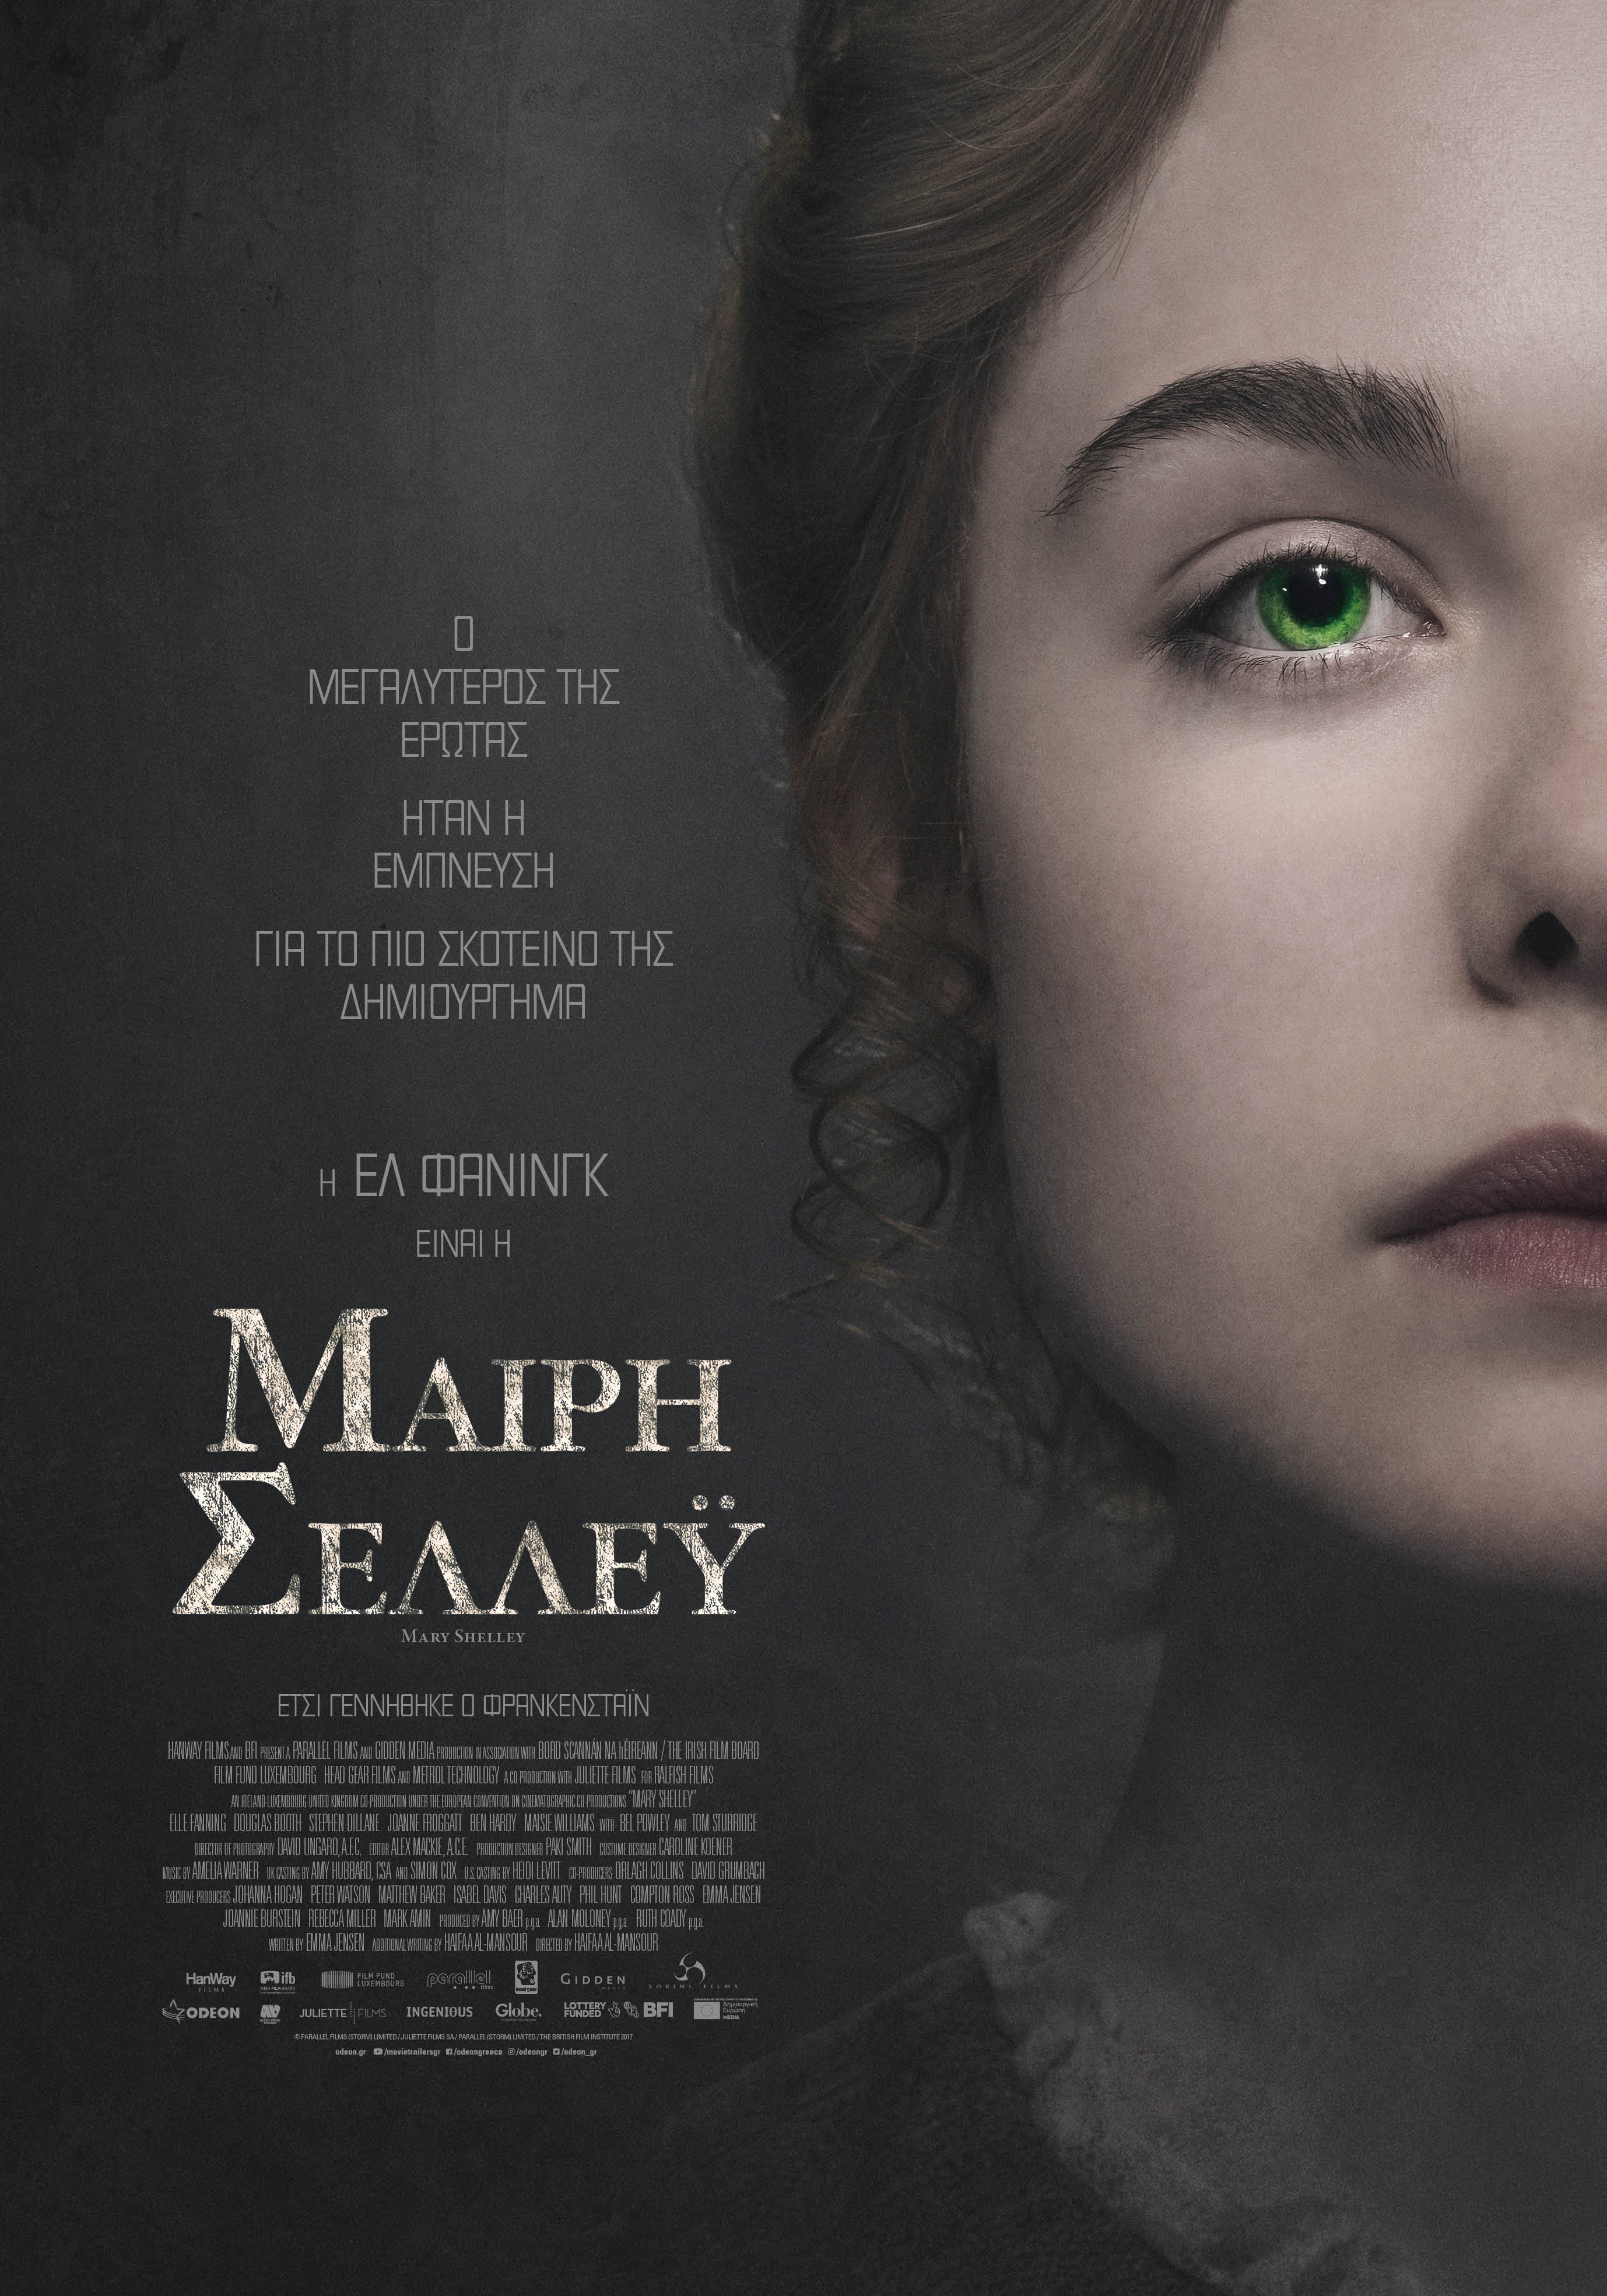 Mary Shelley poster